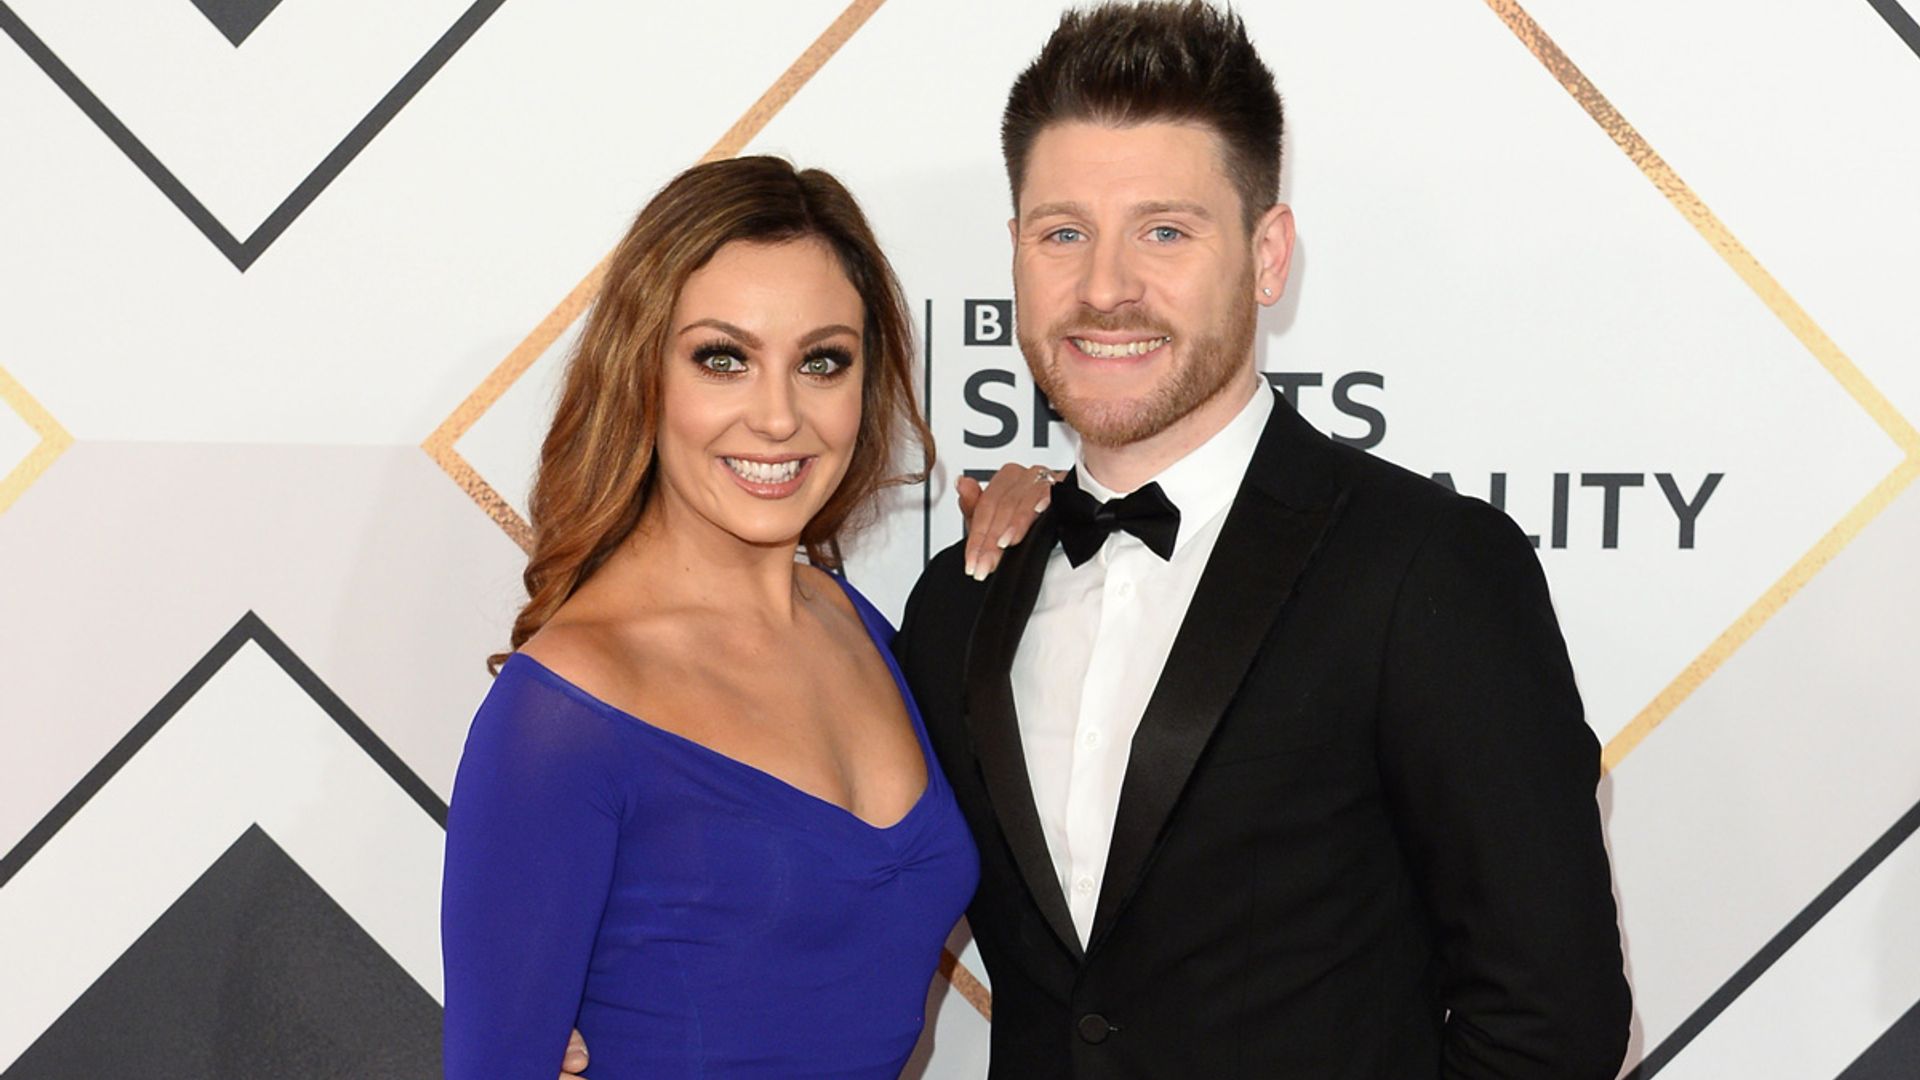 Strictly star Amy Dowden has bought her wedding dress!